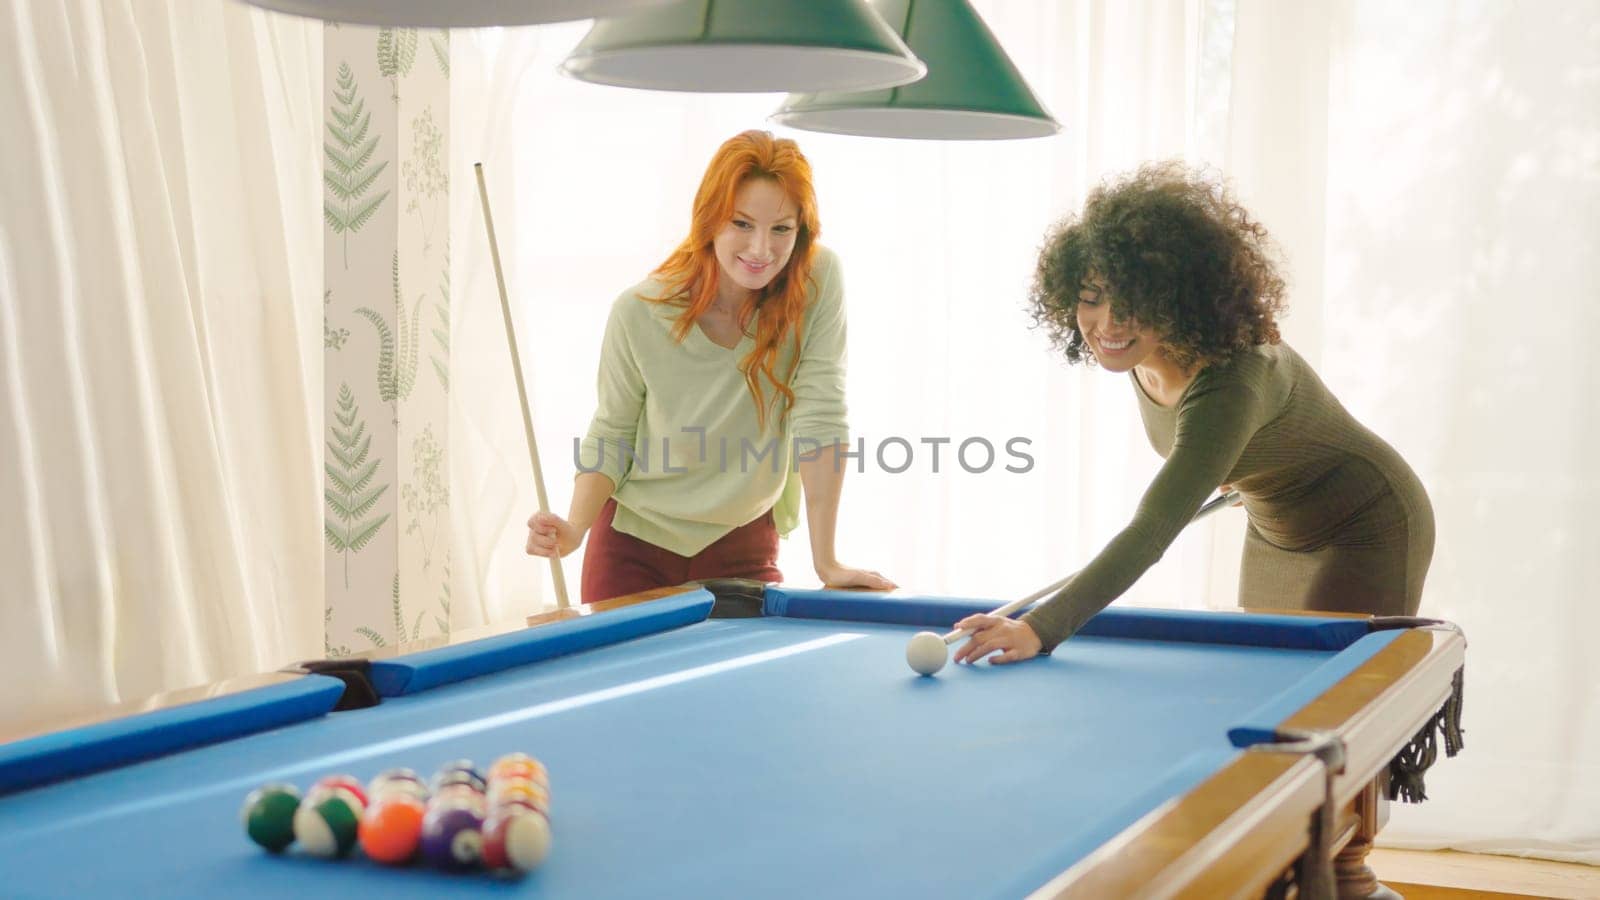 Women starting to play pool at home by ivanmoreno